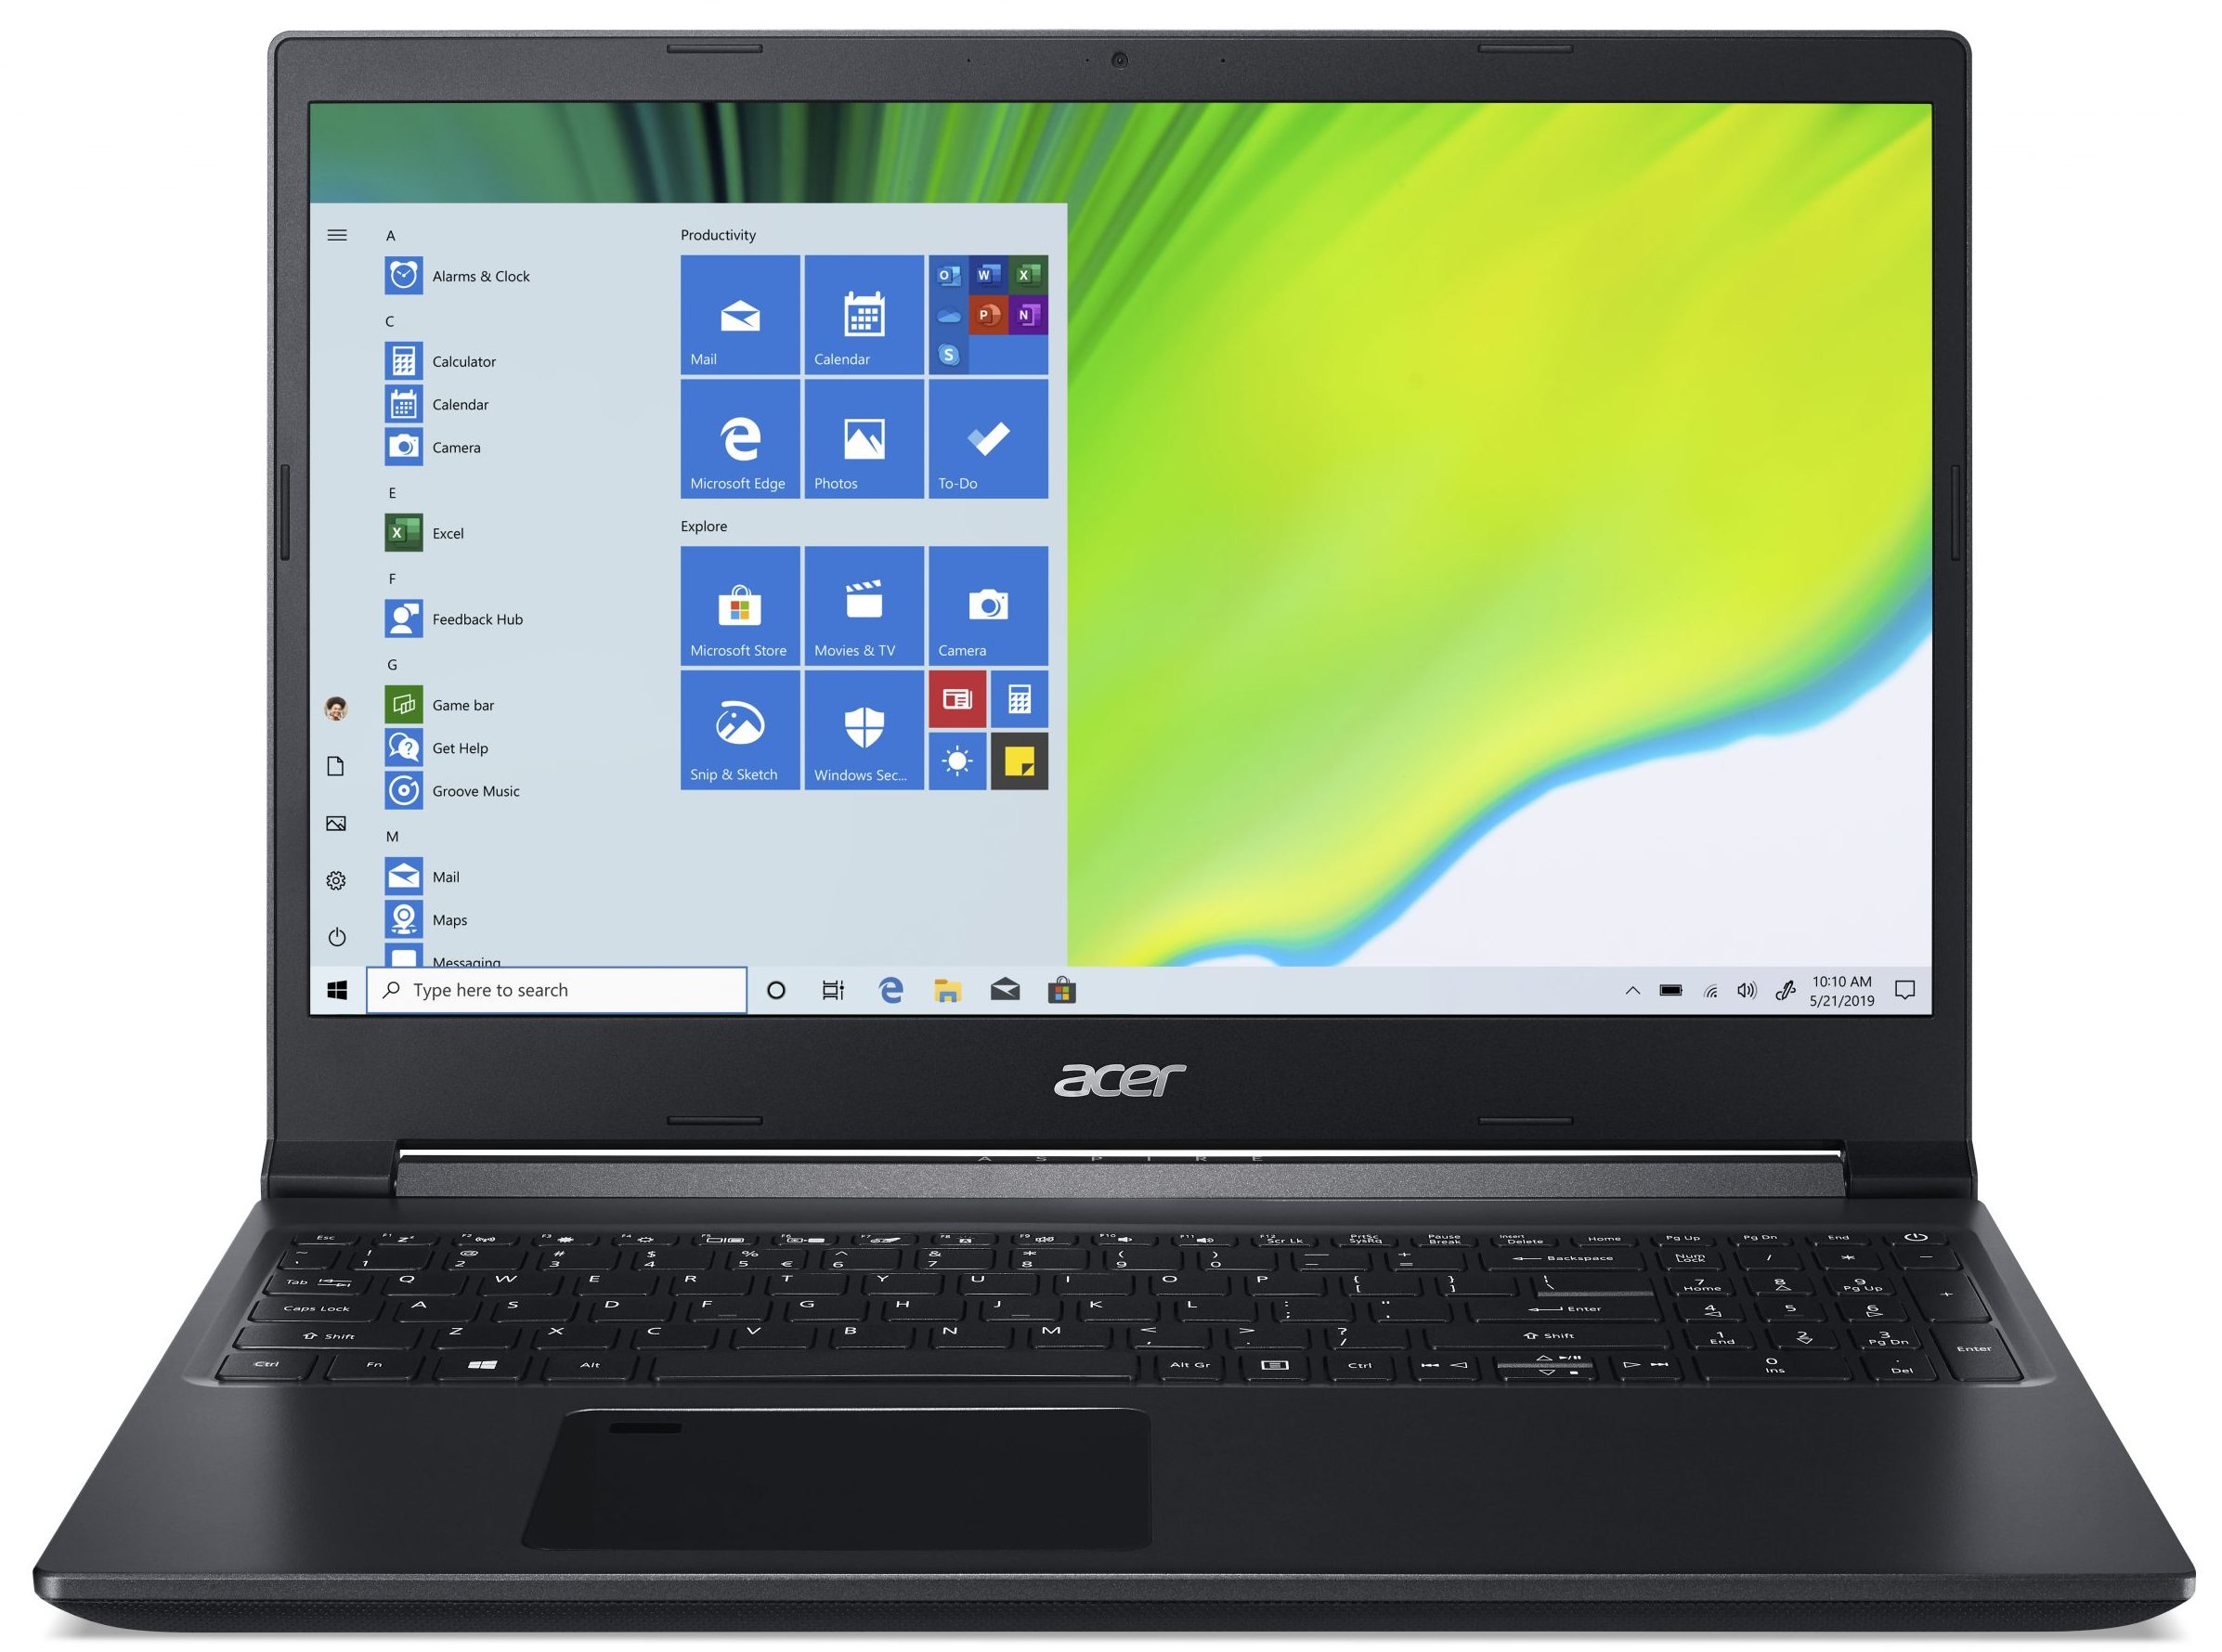 Acer Aspire 7 (A715-75 / A715-75G) - Specs, Tests, and Prices 